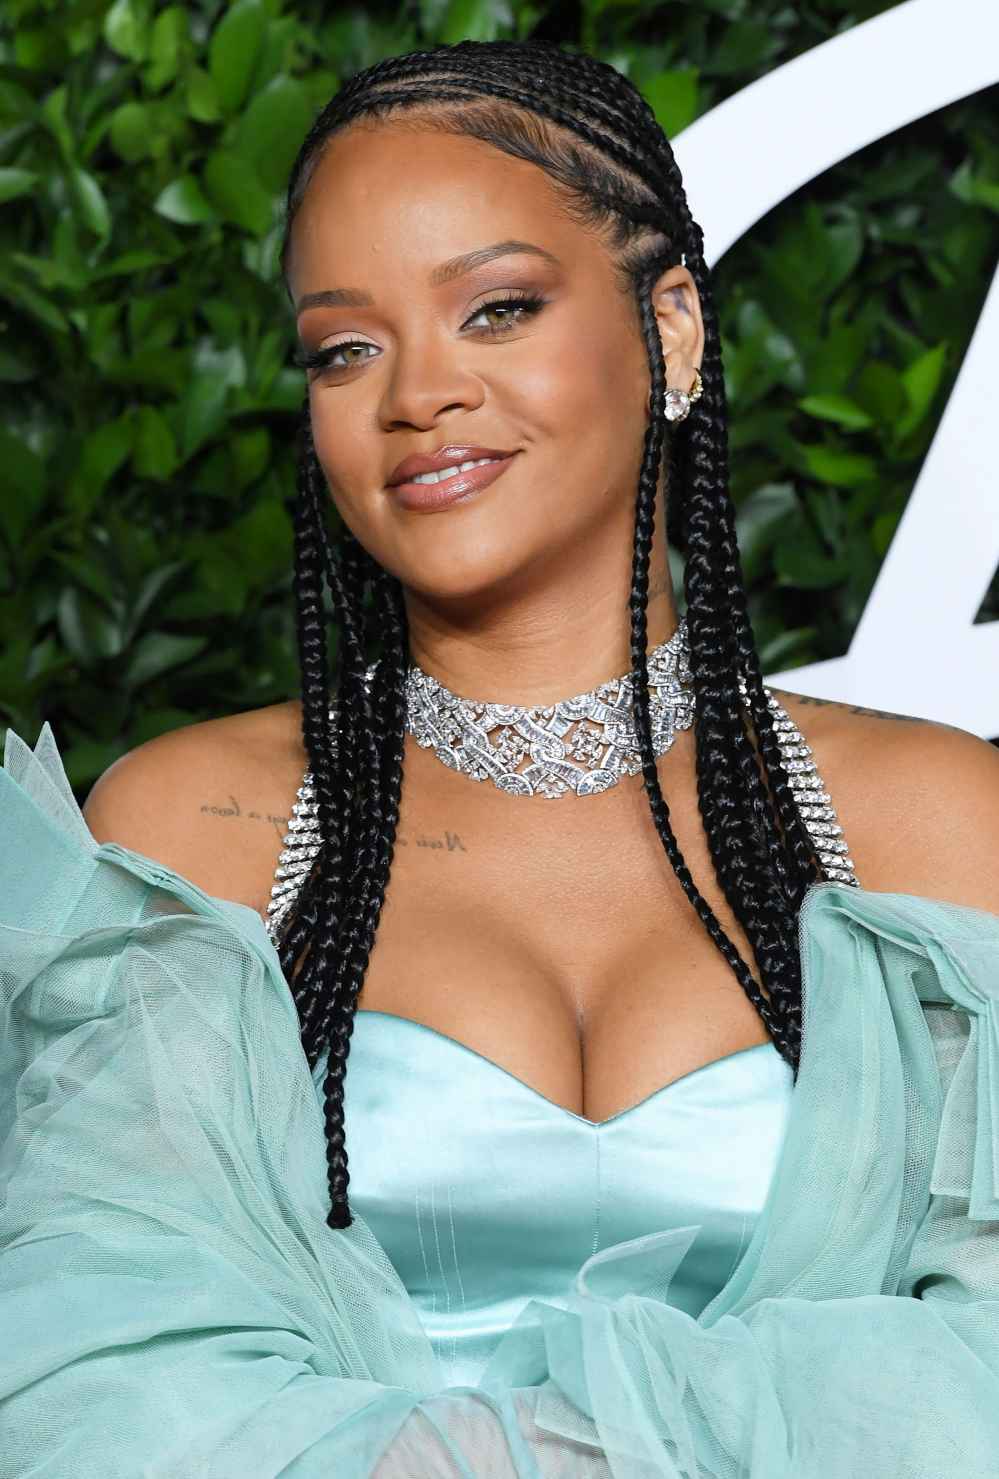 Rihanna Claps Back at a Fan Over SPF: ‘It’s the Ignorance for Me’